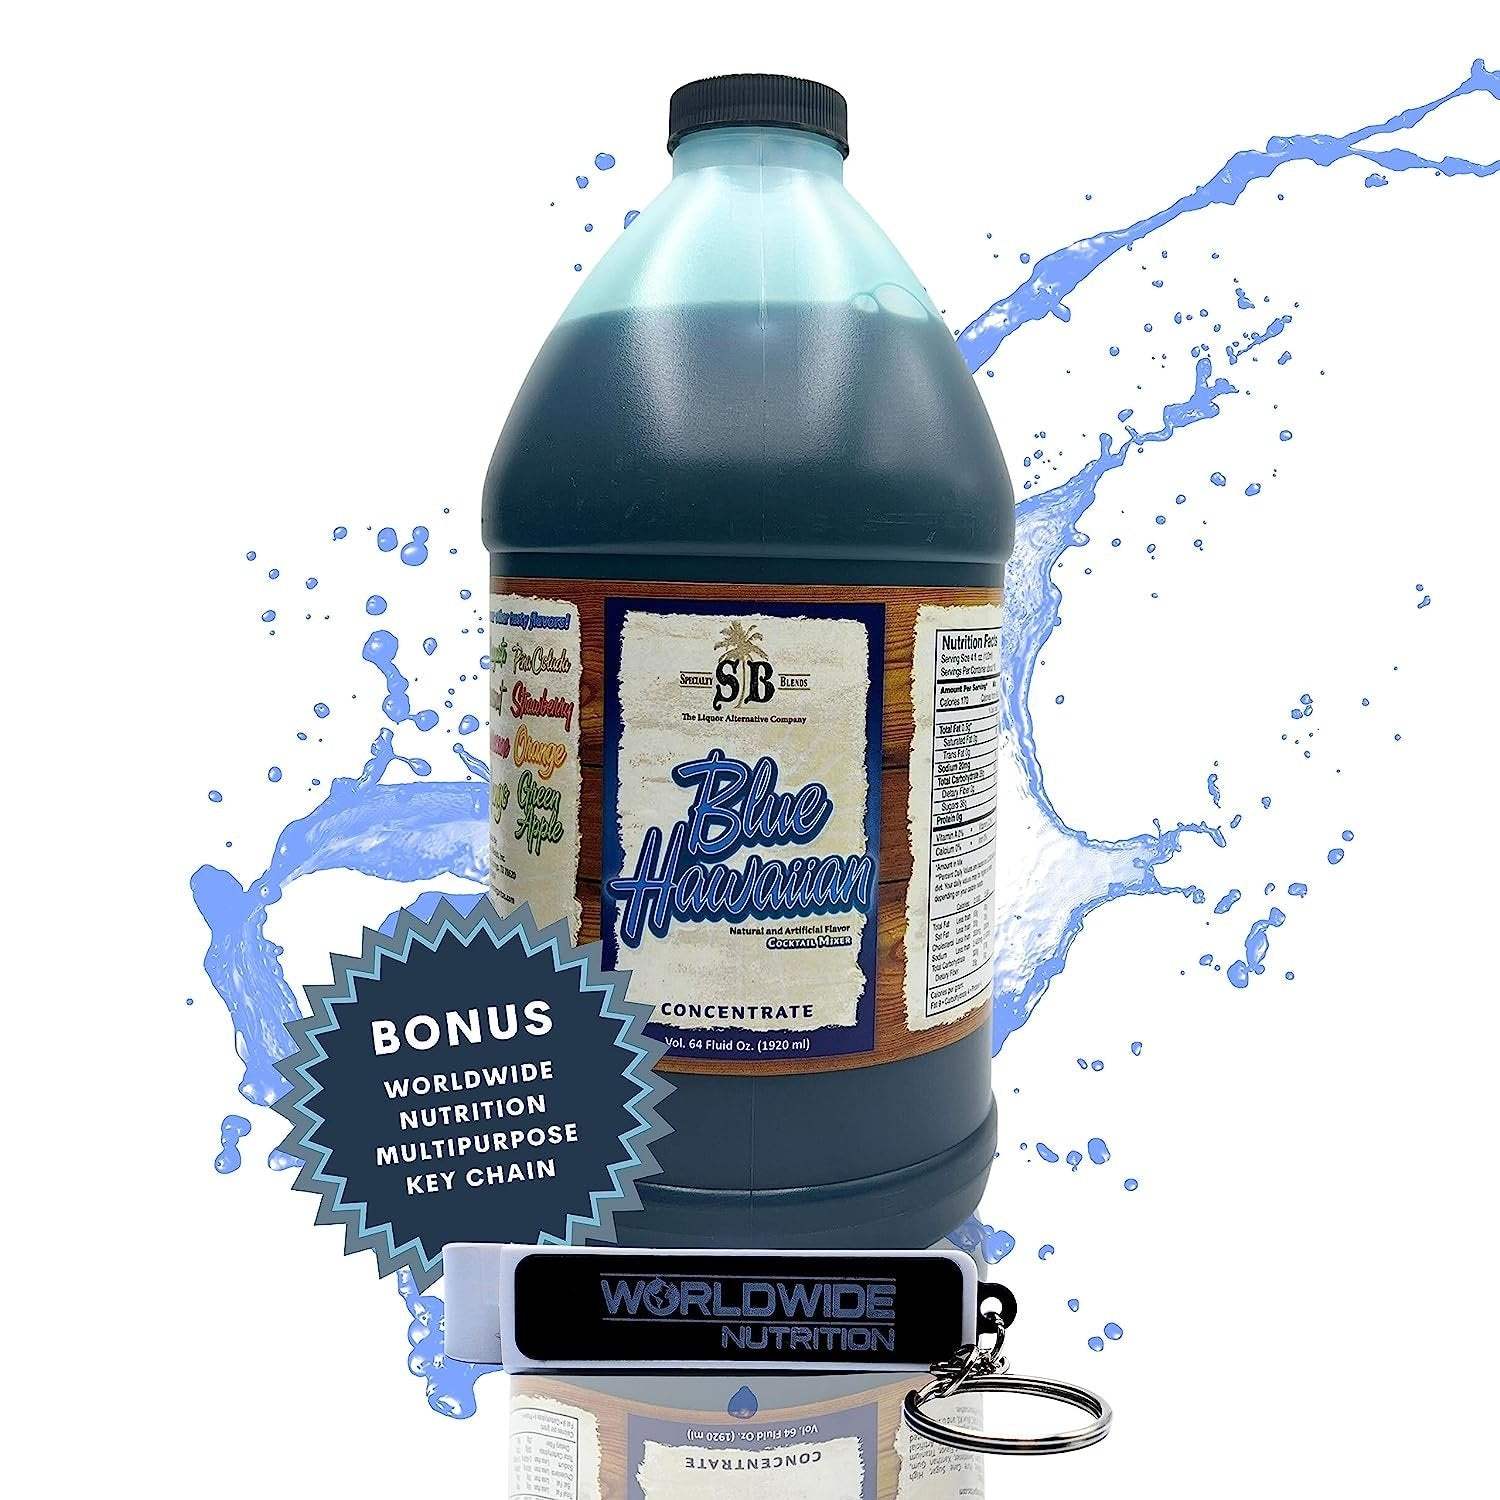 Specialty Blends Blue Hawaiian Drinks Syrup Margarita Mix Concentrate, Made with Organic Blue Hawaiian 1/2 Gallon Drink Mix (Pack of 1) - with Bonus Worldwide Nutrition Multi Purpose Key Chain